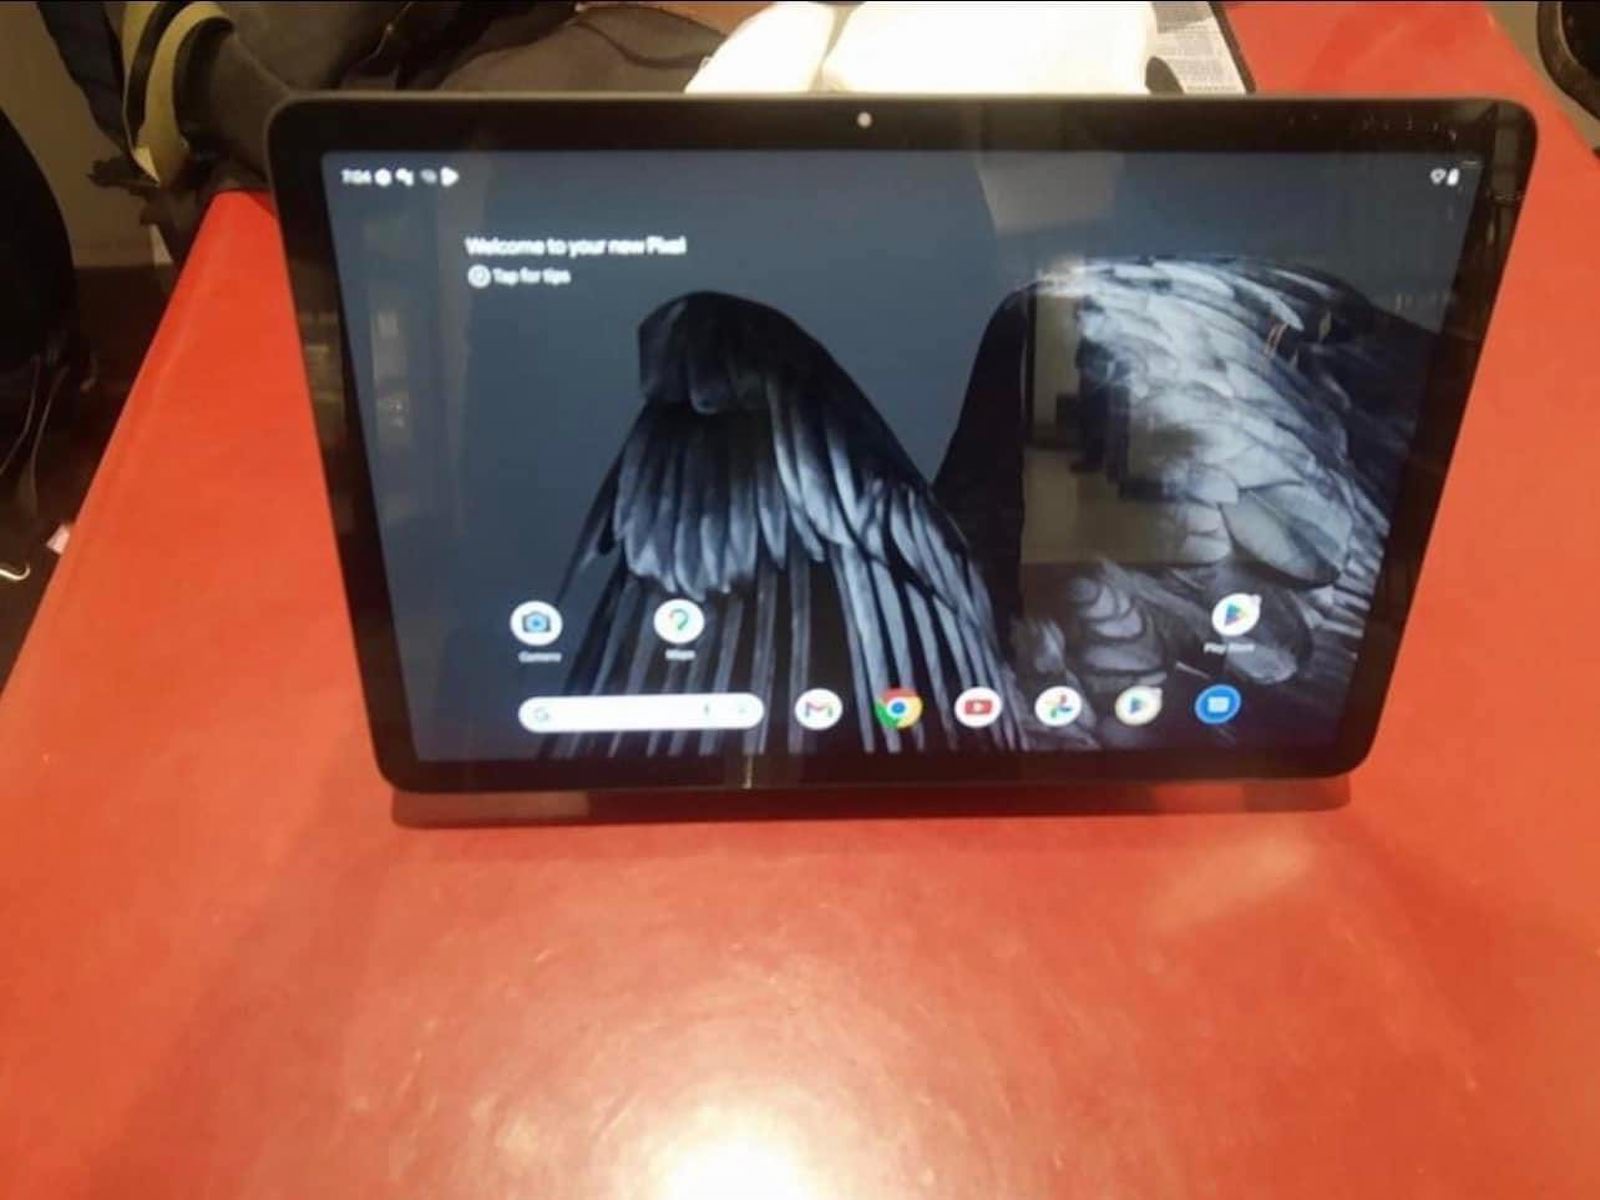 Is this the new pixel tablet